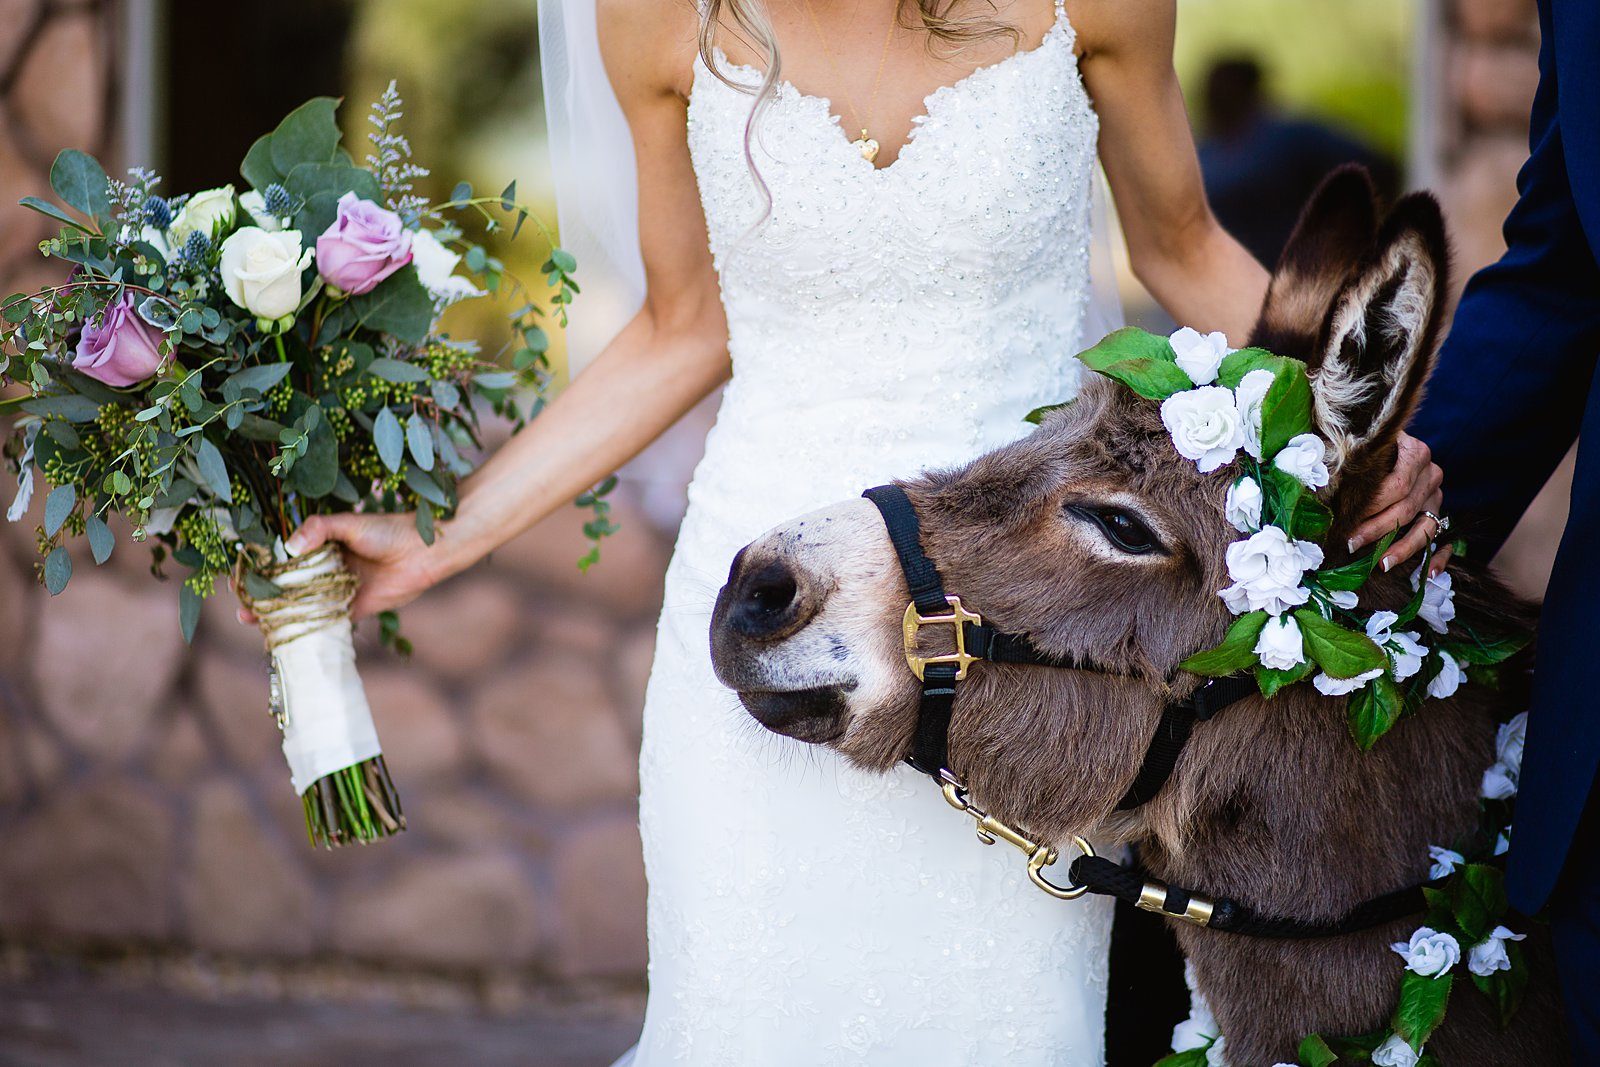 The beer burro trying to eat the bride's bouquet by Arizona wedding photographer PMA Photography.